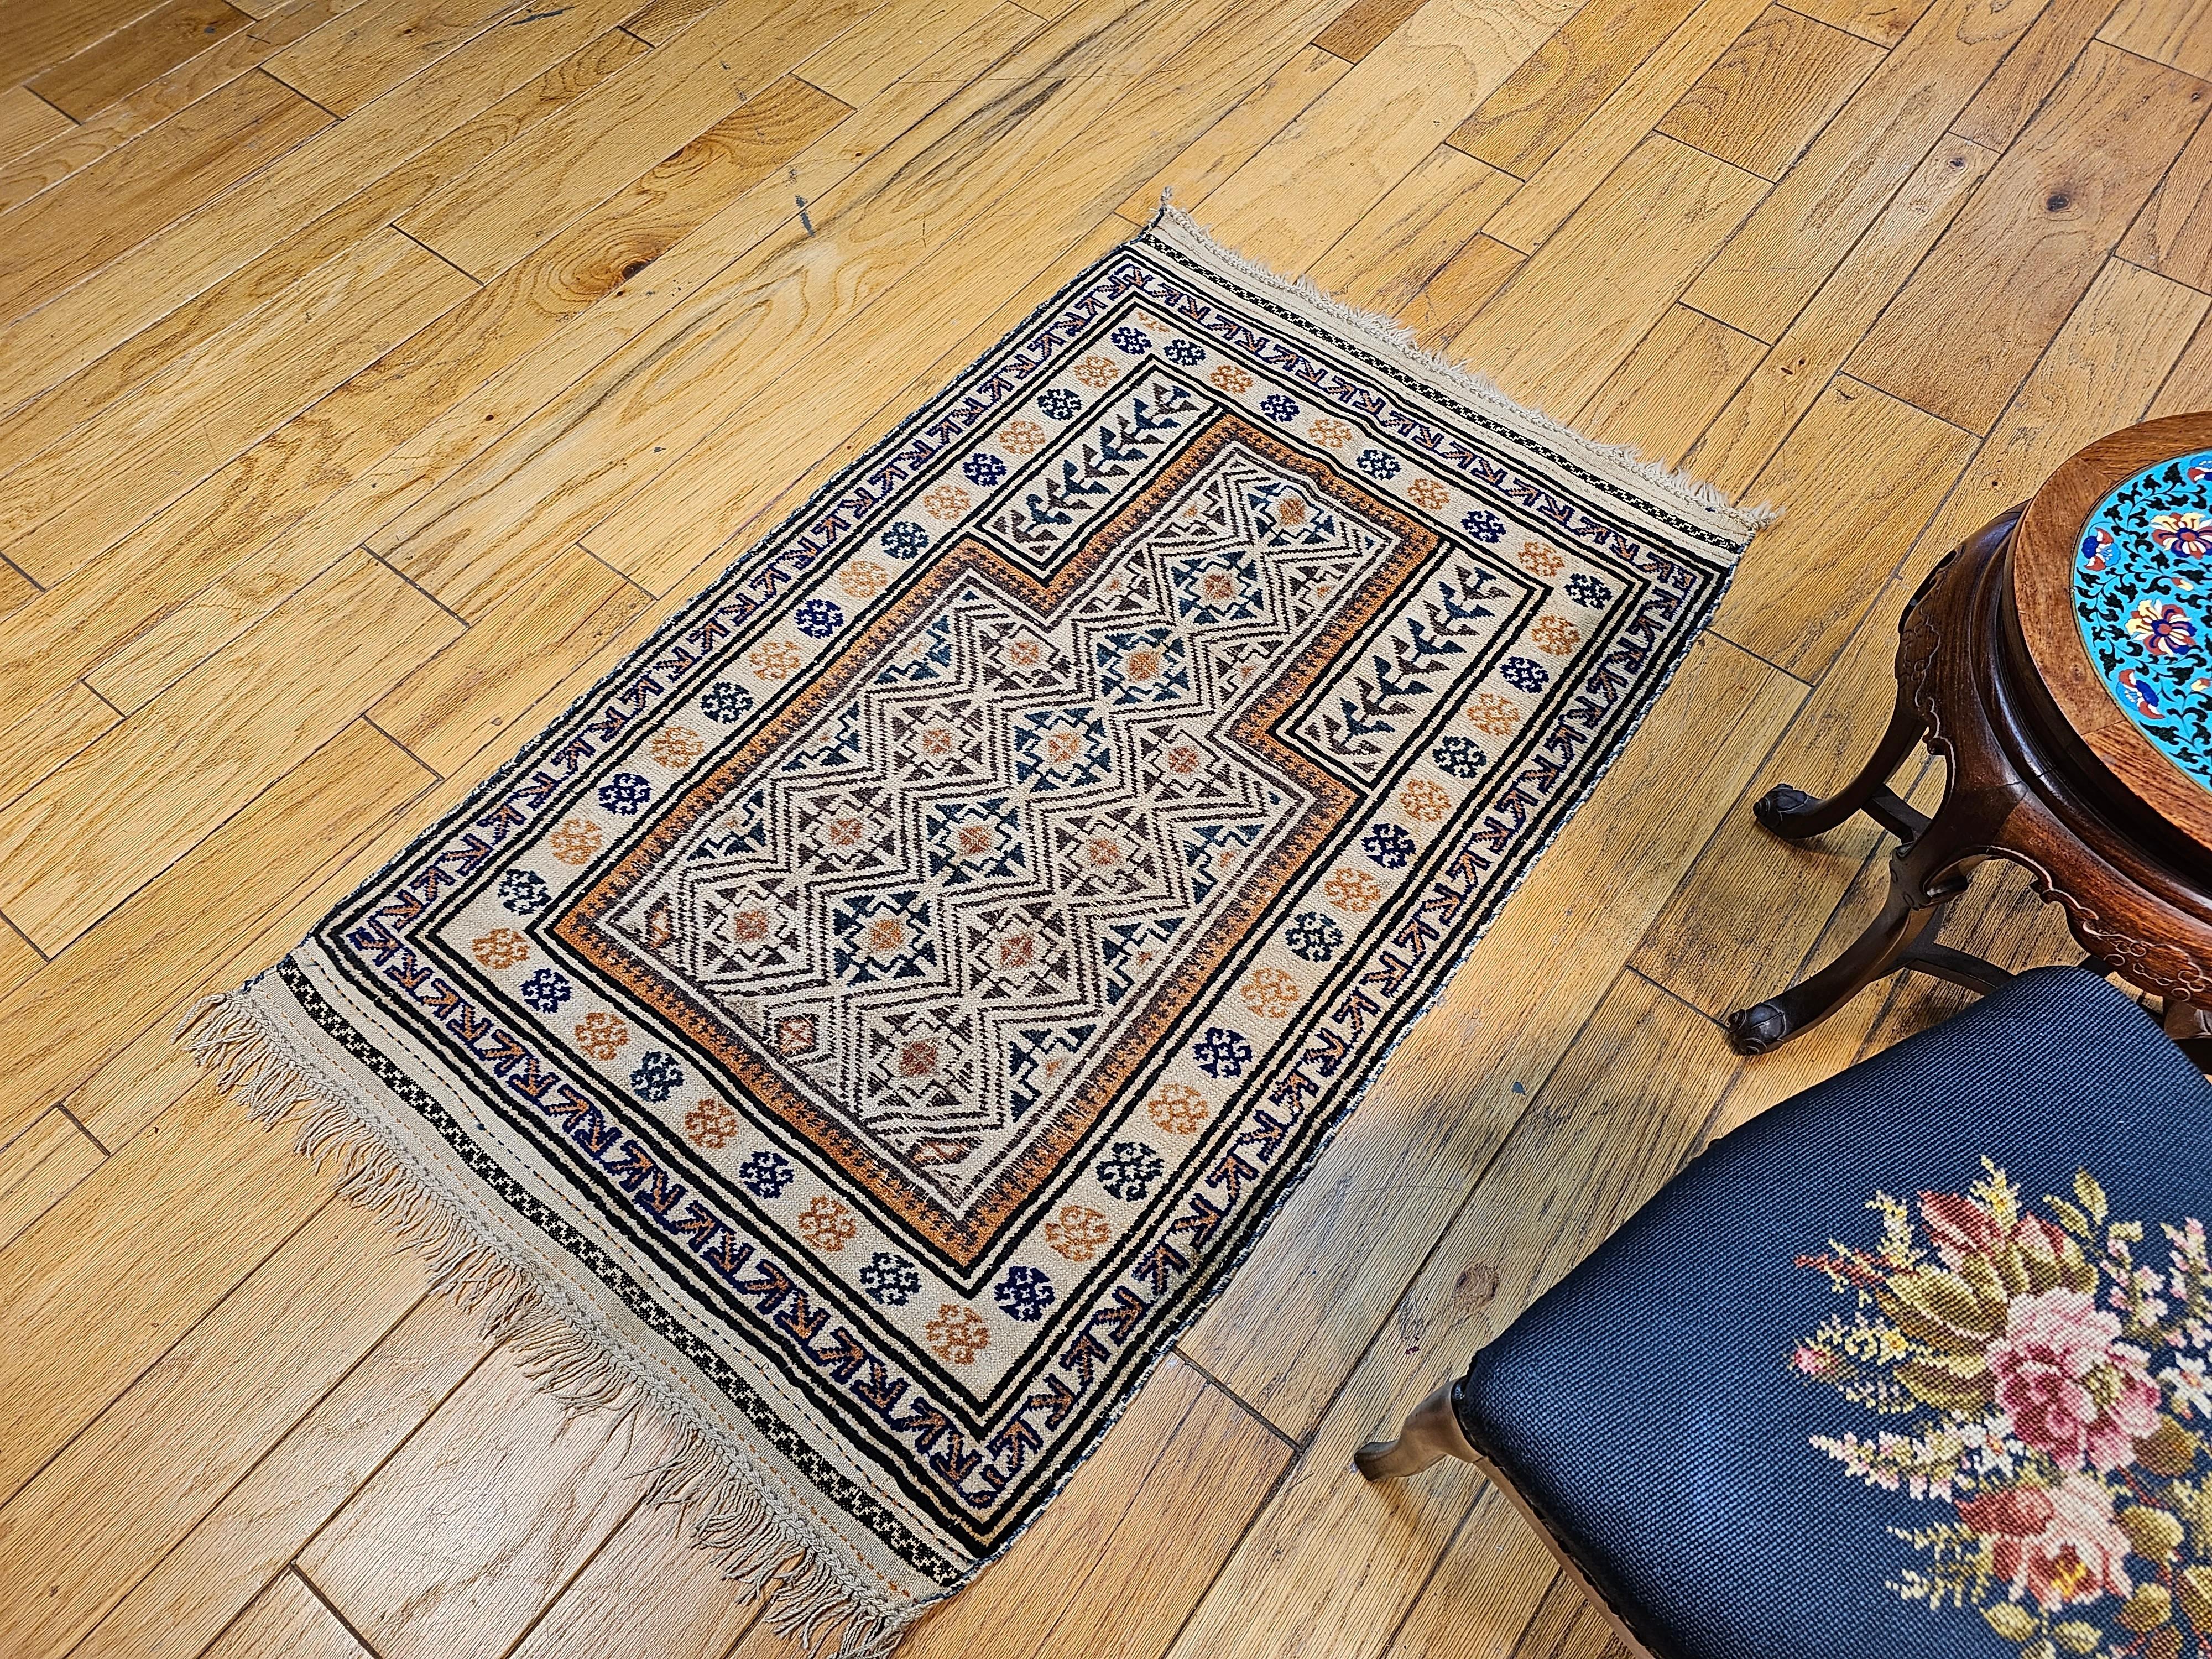 Early 20th Century Persian Baluch Prayer Rug Pattern in Ivory, Brown, Navy Blue For Sale 4